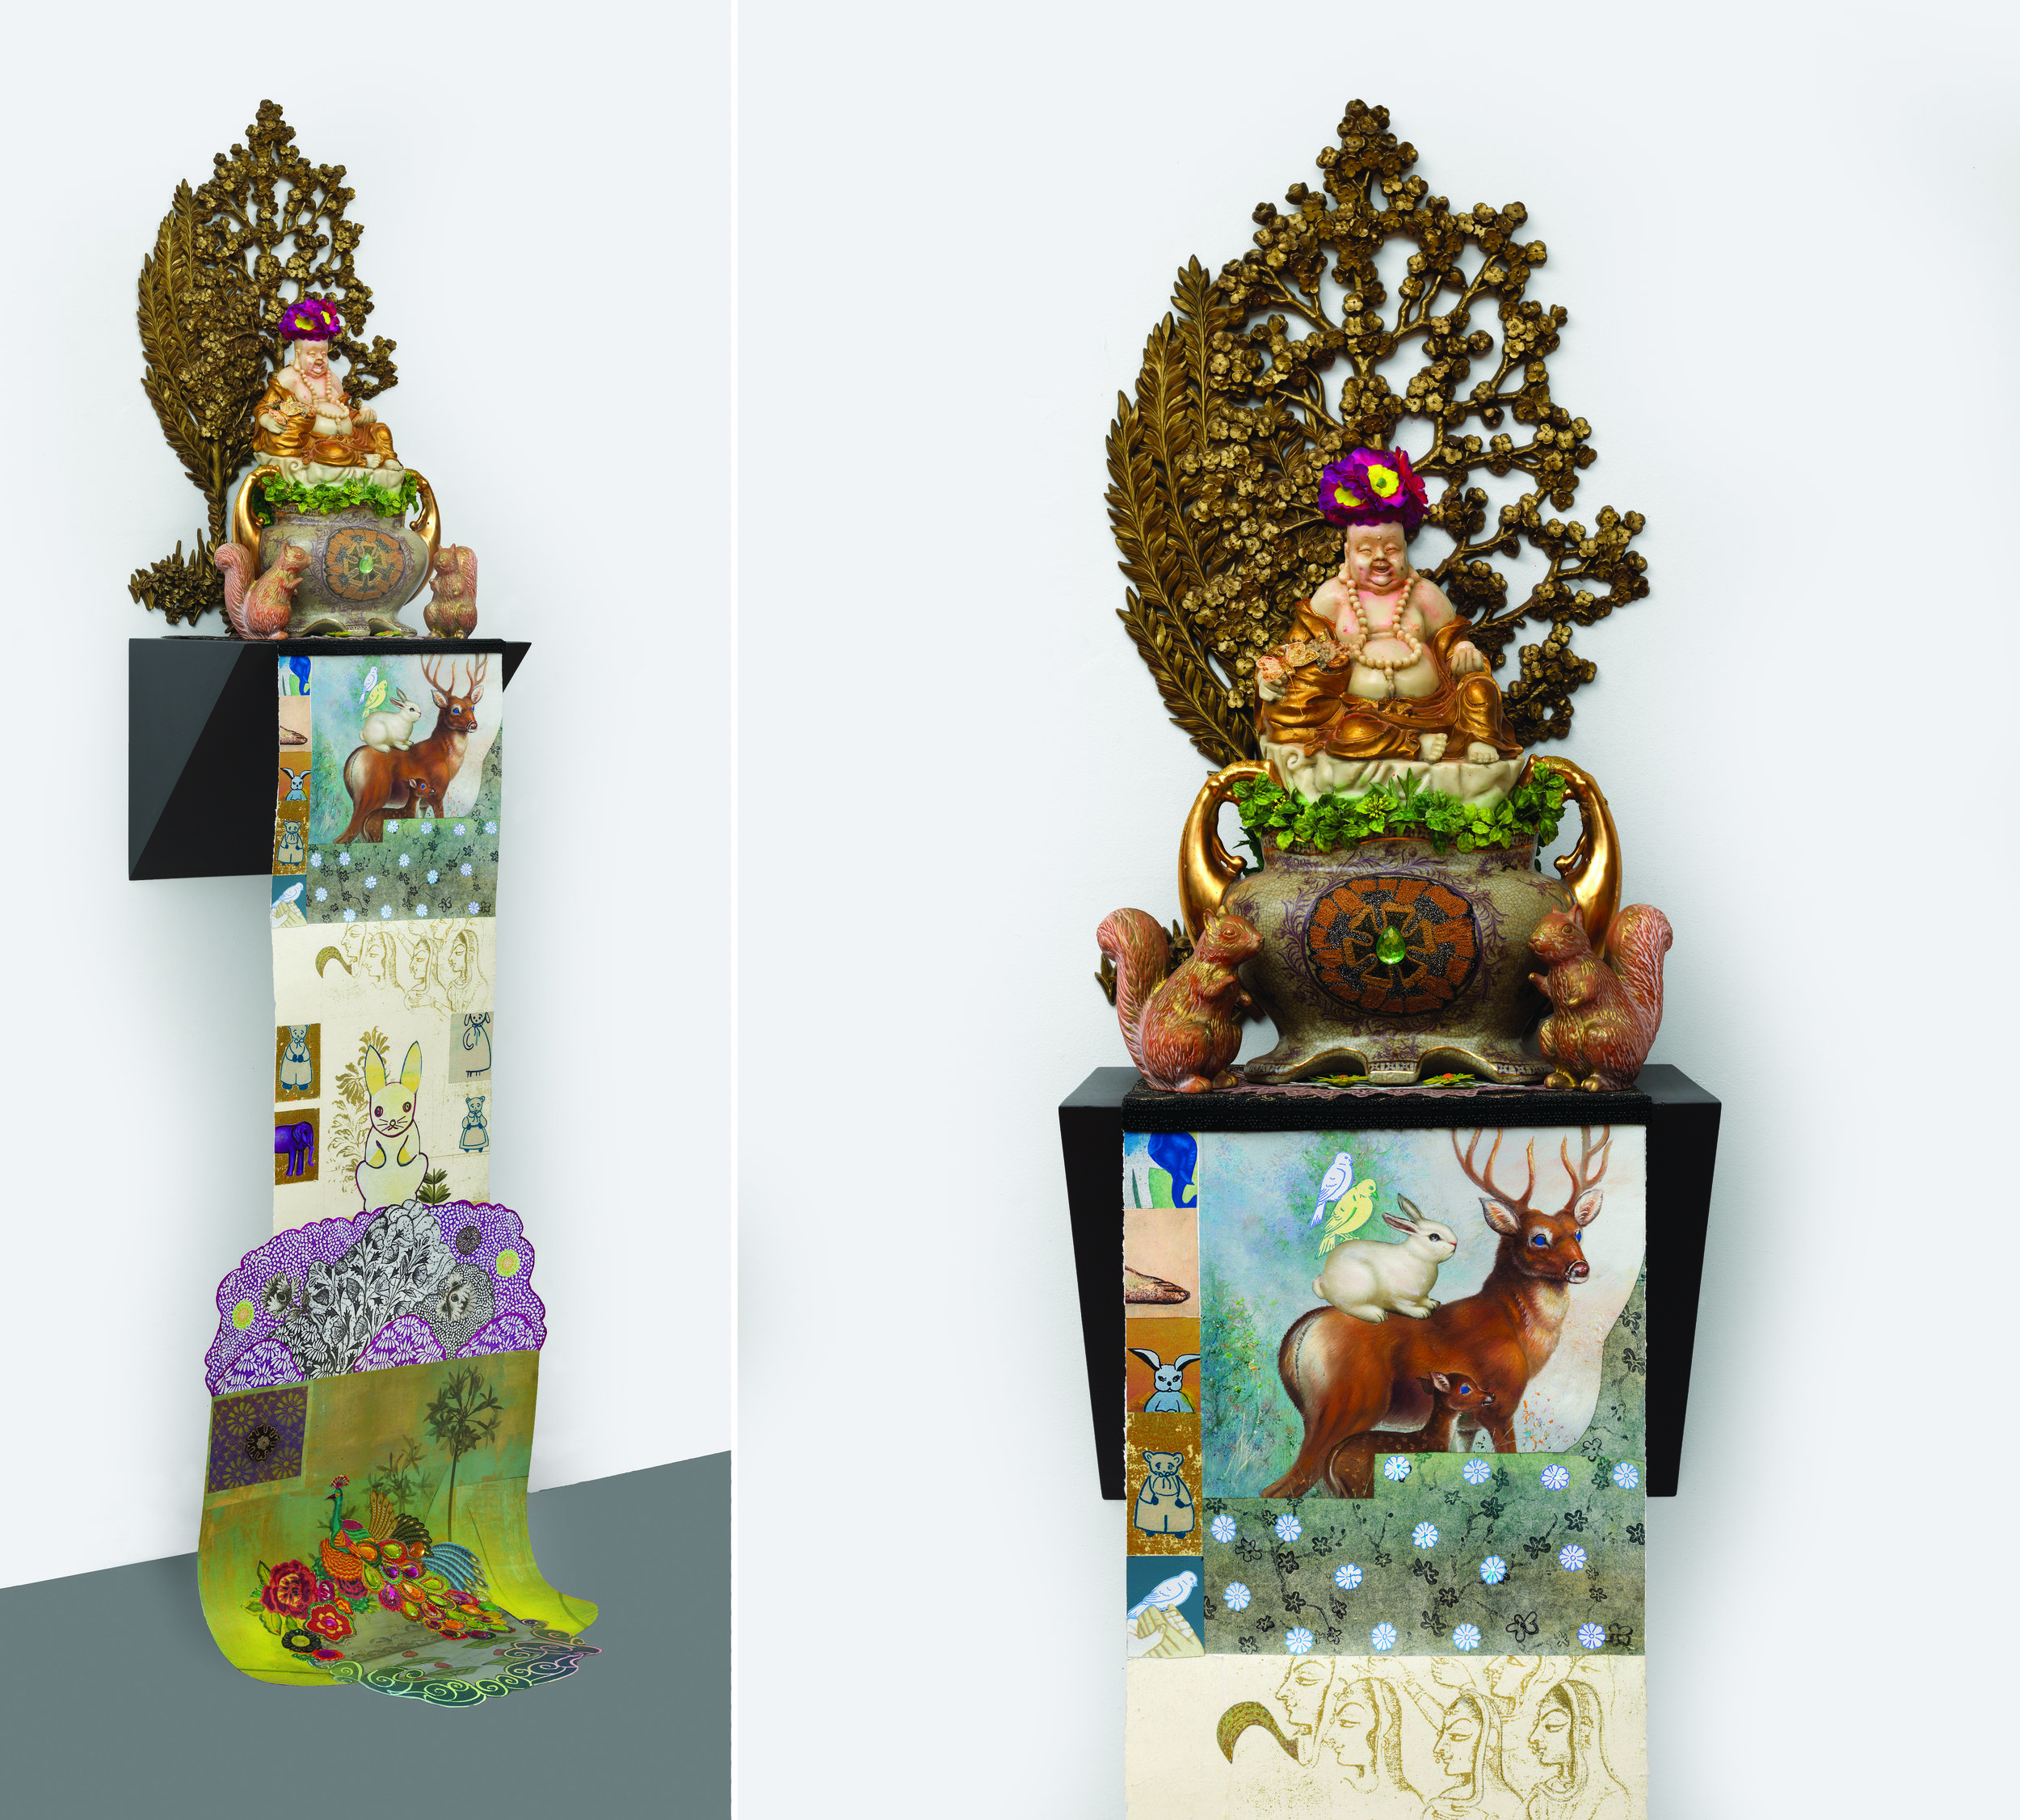 The Good Keeper of the Animals and Birds, sculpture/objects: 30" × 16" × 18" Scroll: 66" × 18", mixed media, 2009 - 2016